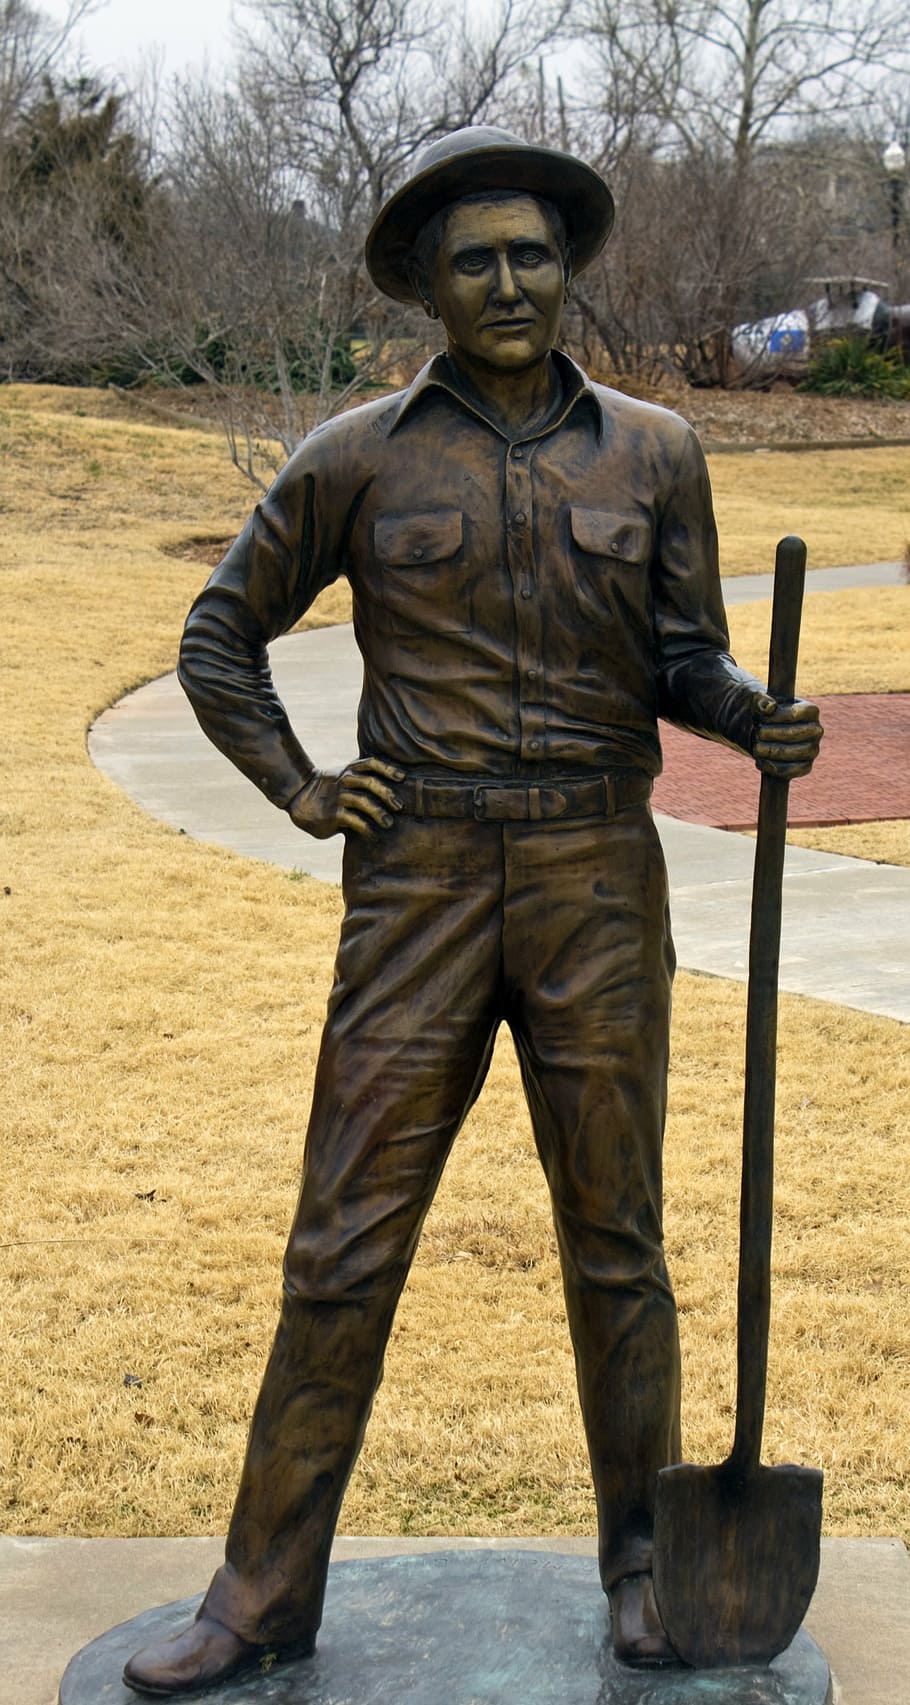 worker, oil, field, oklahoma, oklahoma city, history, statue, front view, standing, full length